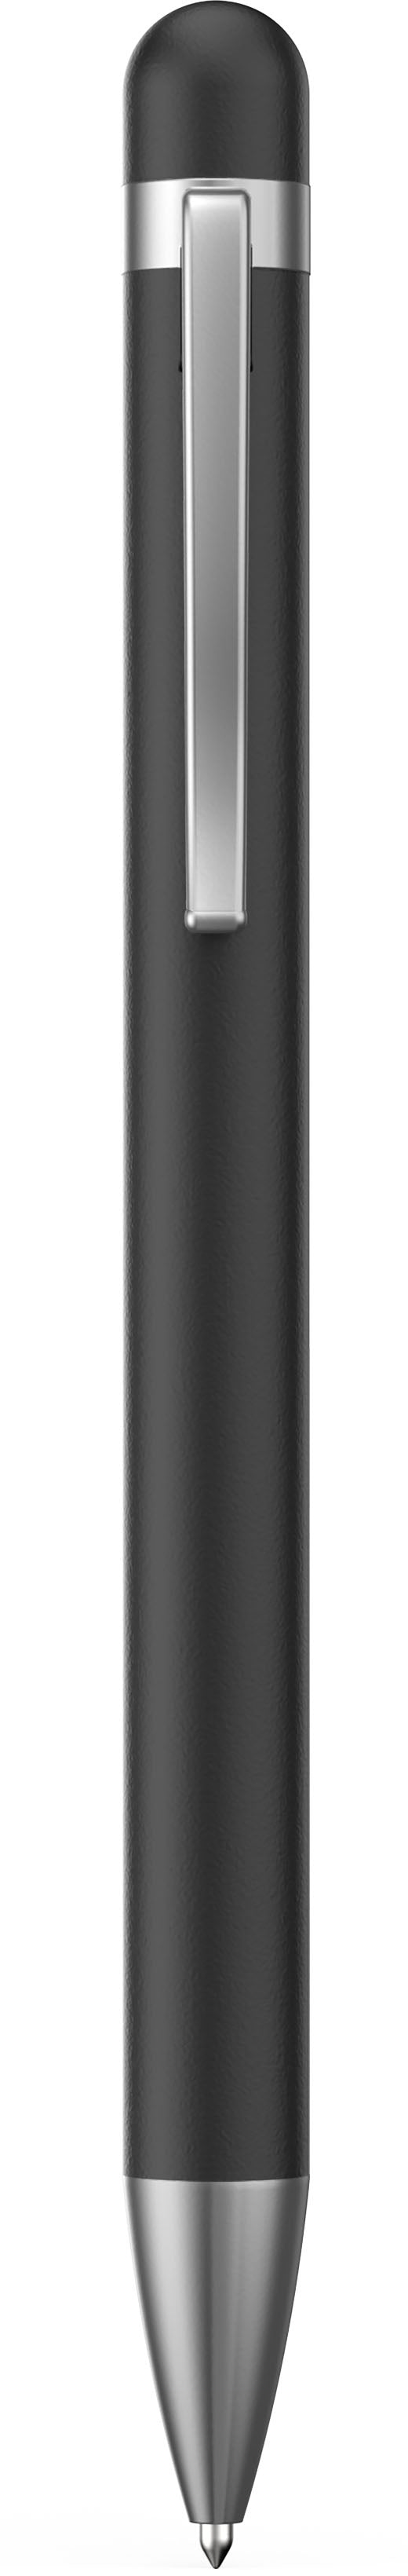 Philips VoiceTracer DVT1600 32GB Recording Pen with Sembly Speech-to-Text Software - Black_0